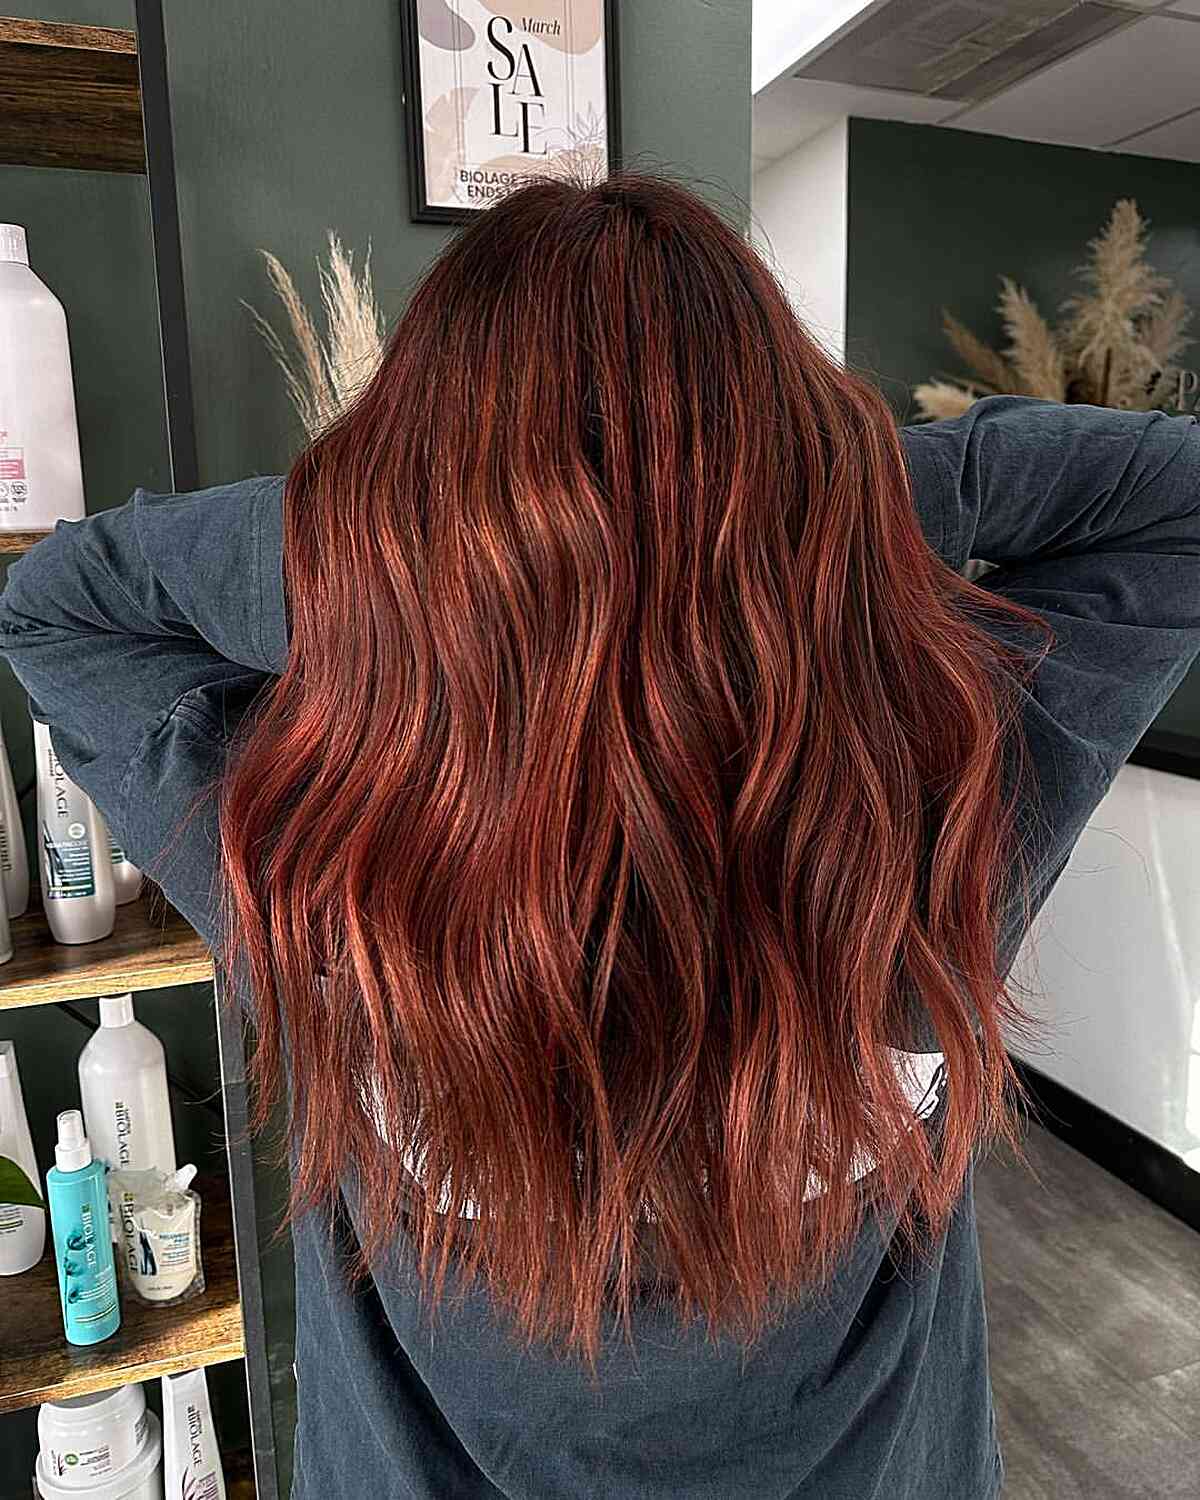 Long Brownish Cherry Red Balayage Hair with Choppy Ends